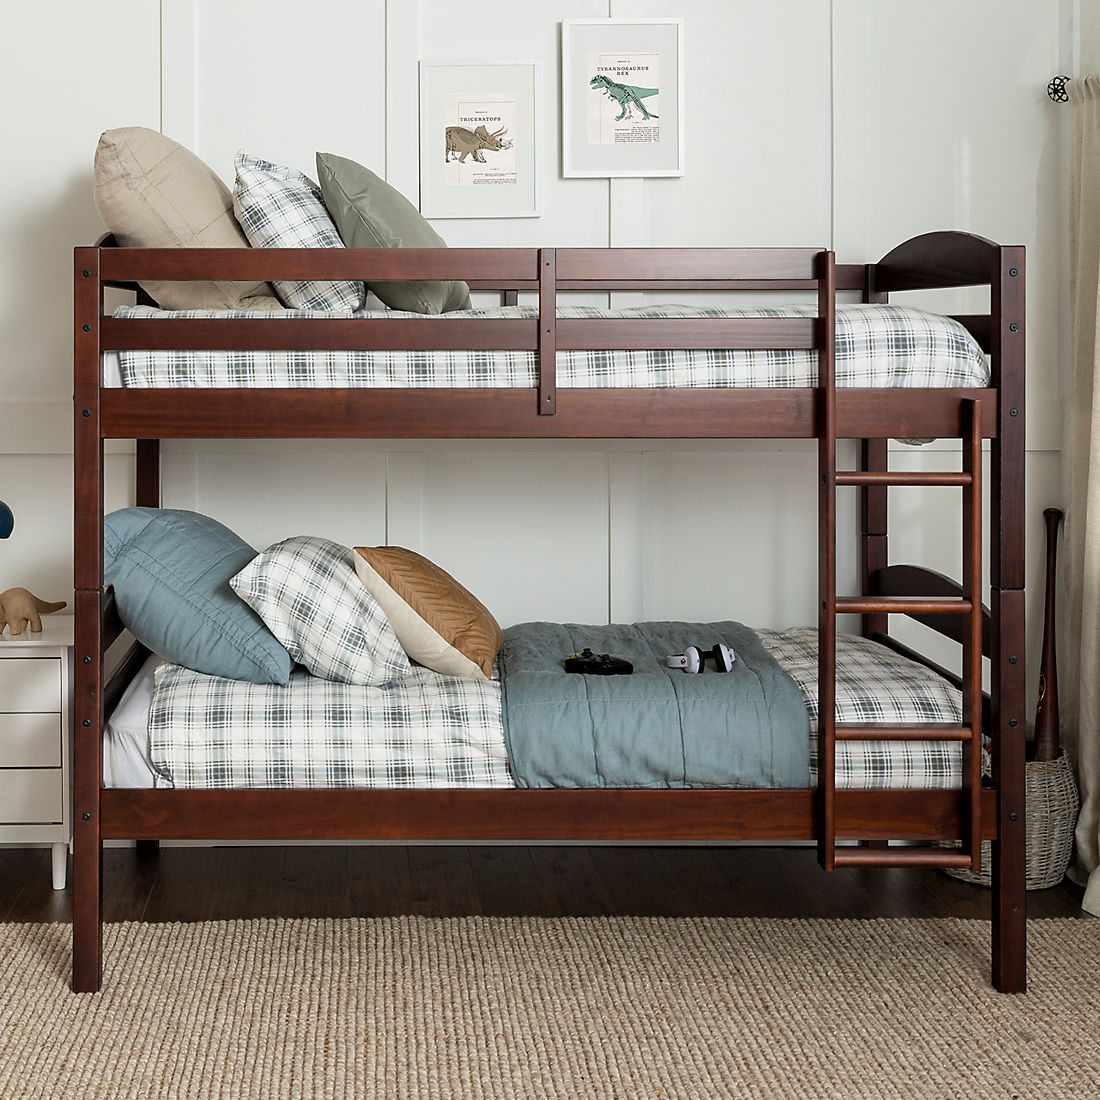 W Trends Twin Size Solid Wood Bunk Bed, Wooden Bunk Bed Instructions